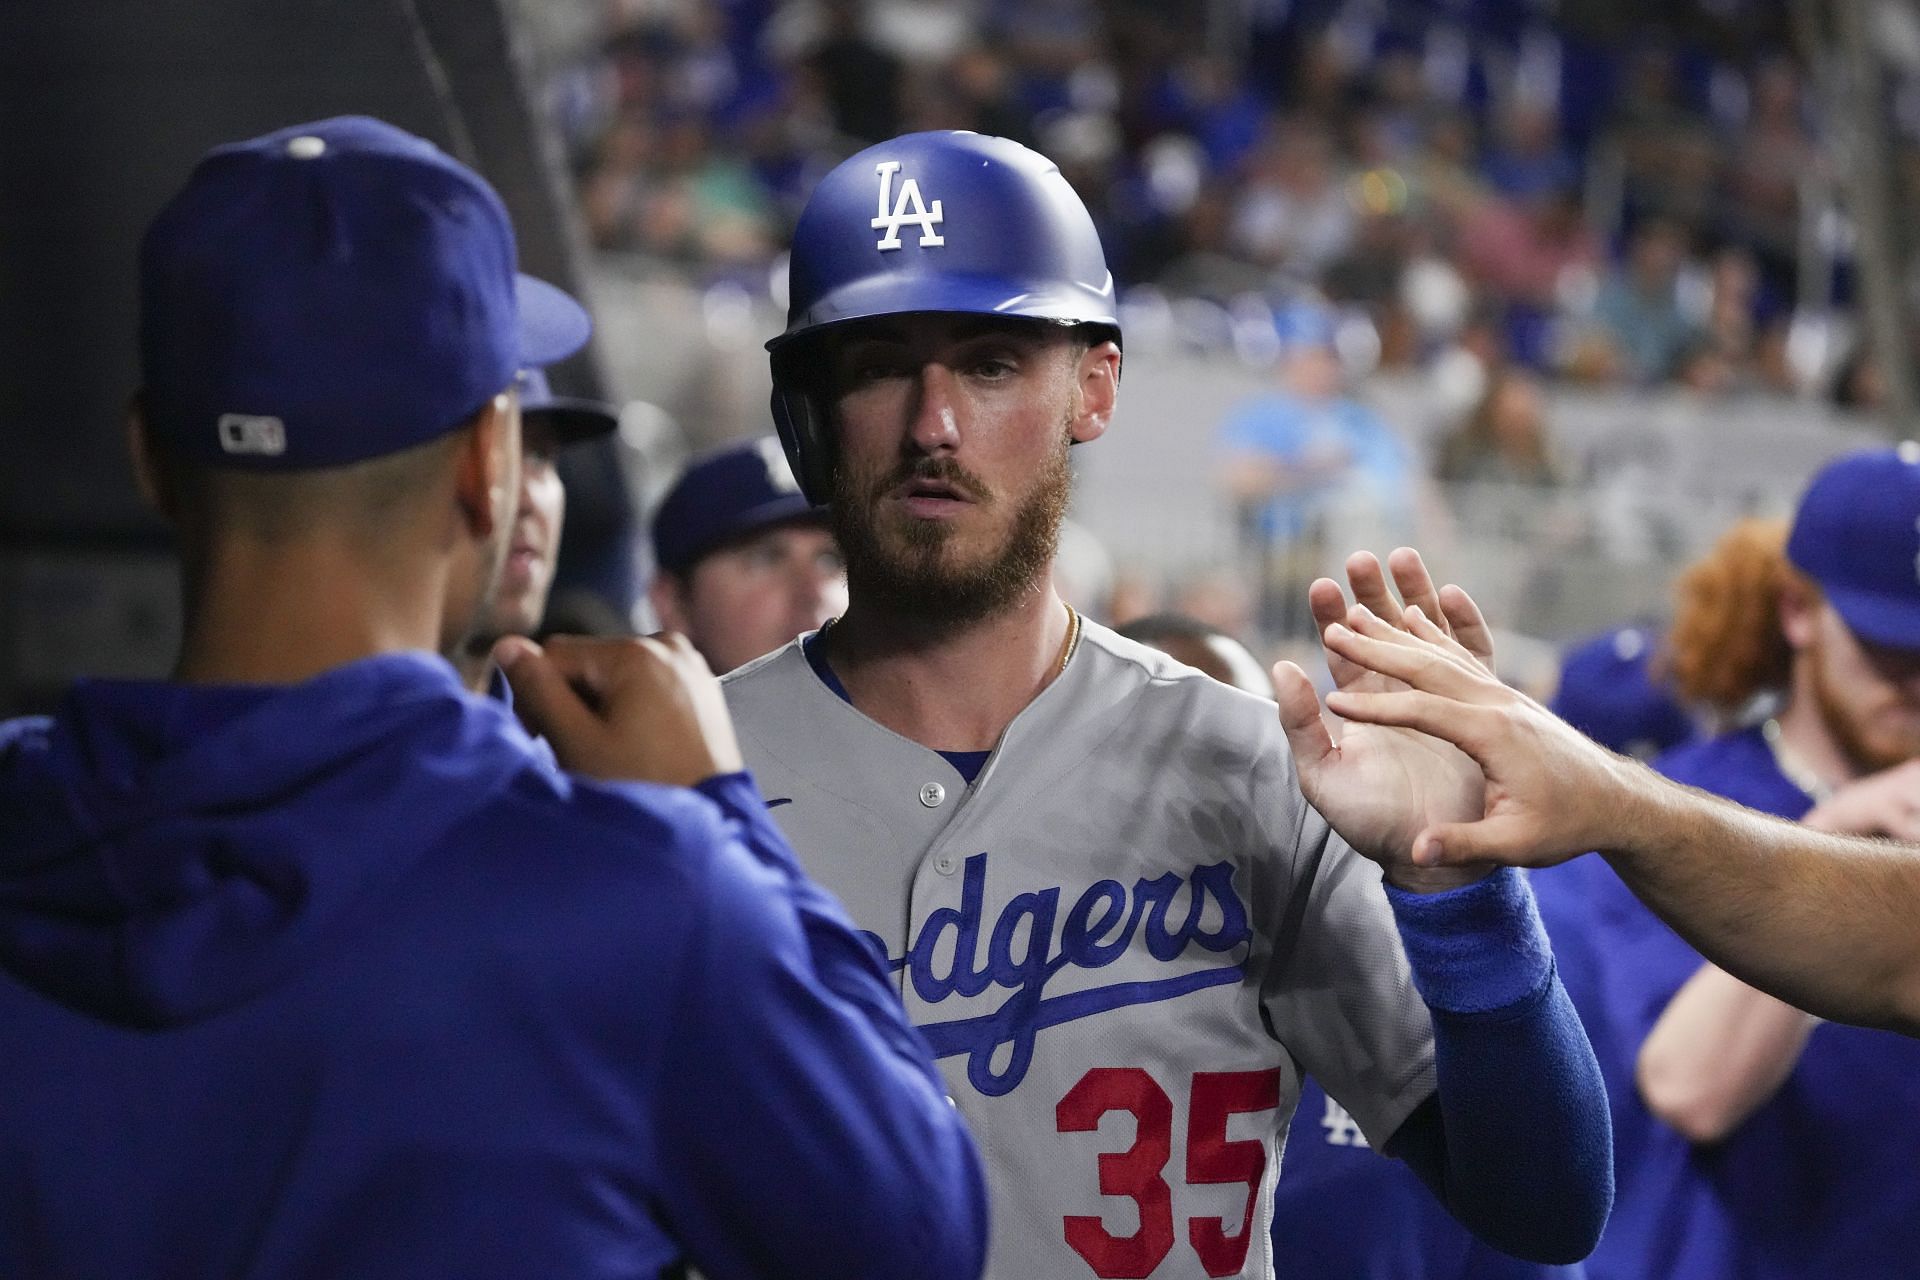 Fans applaud Cody Bellinger's fiancée, Chase, as she shows off her